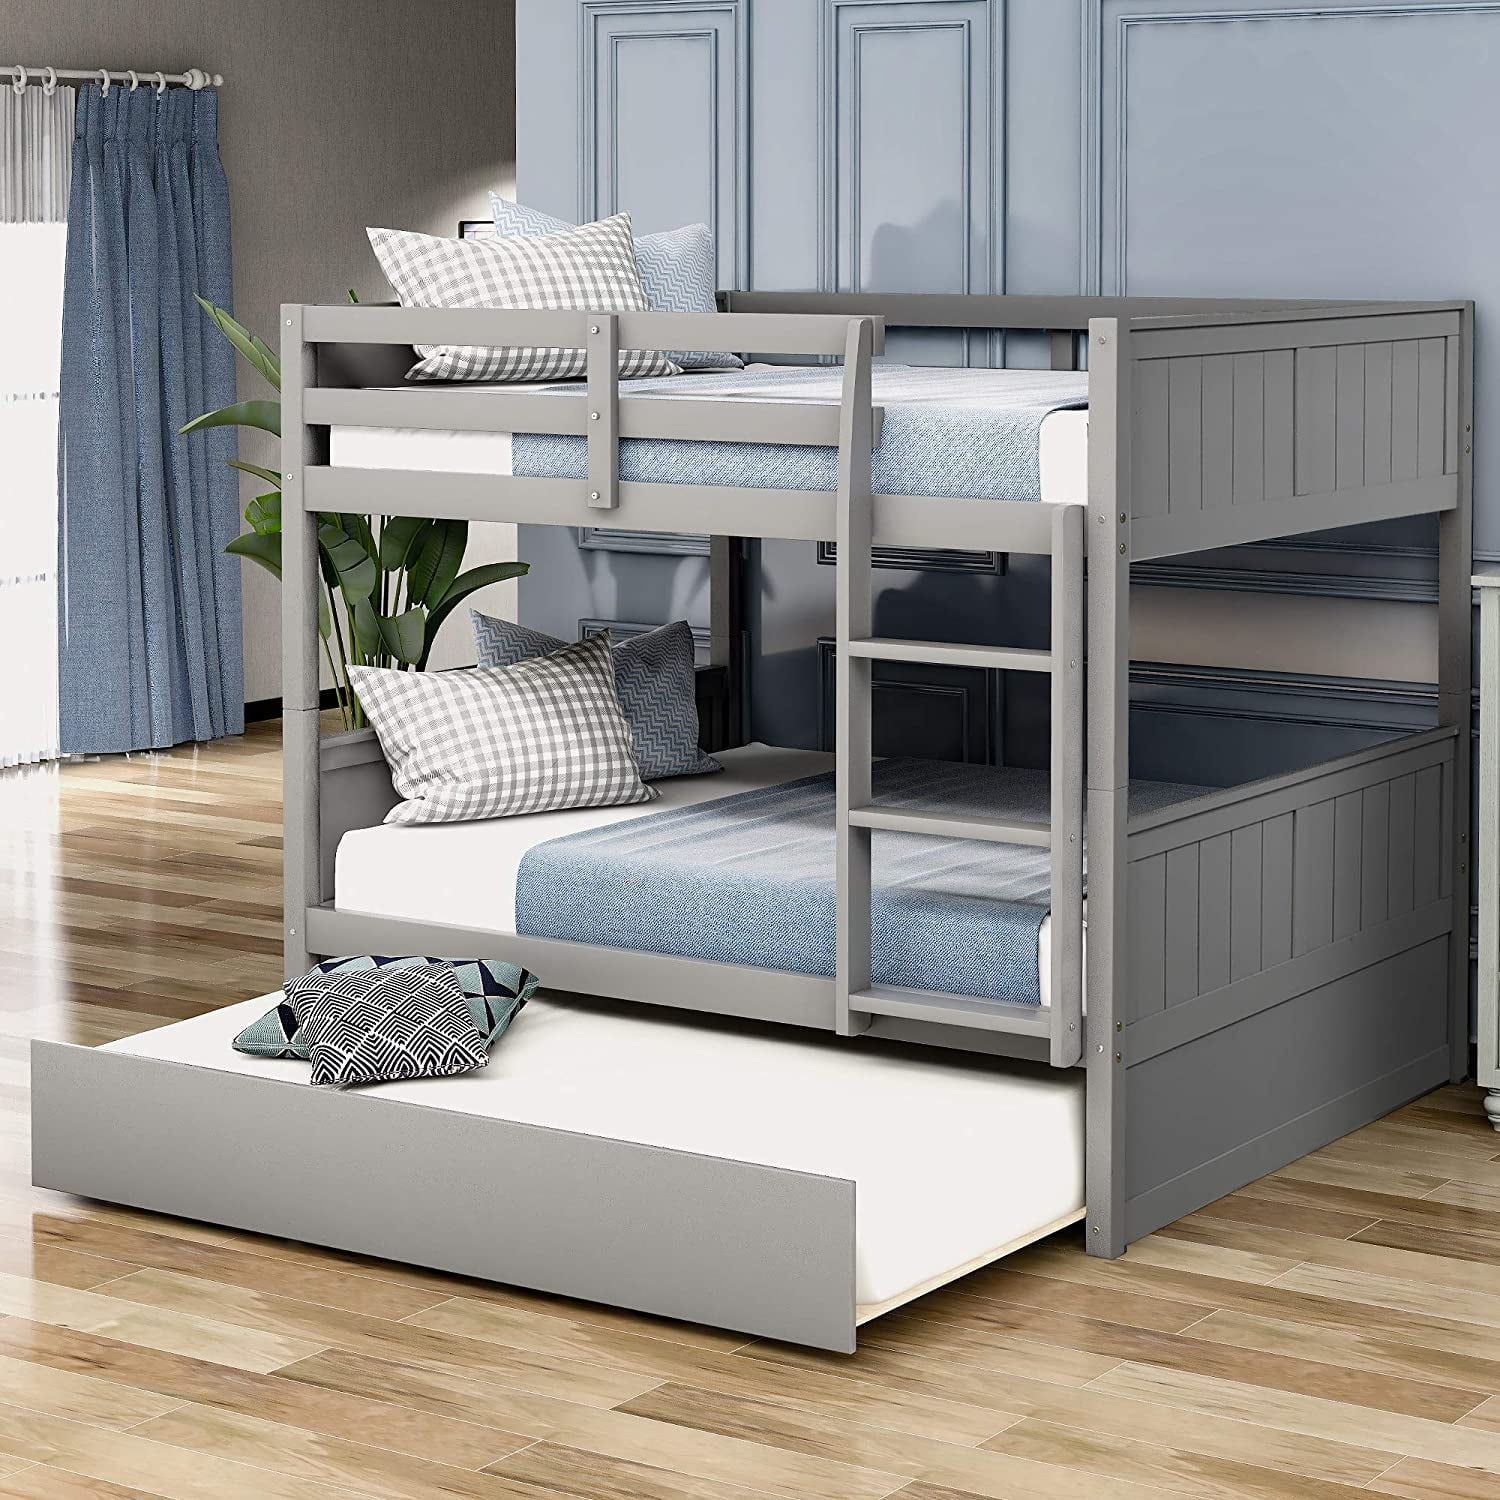 Soges Full Over Bunk Bed With Twin, Bunk Bed With Pull Out